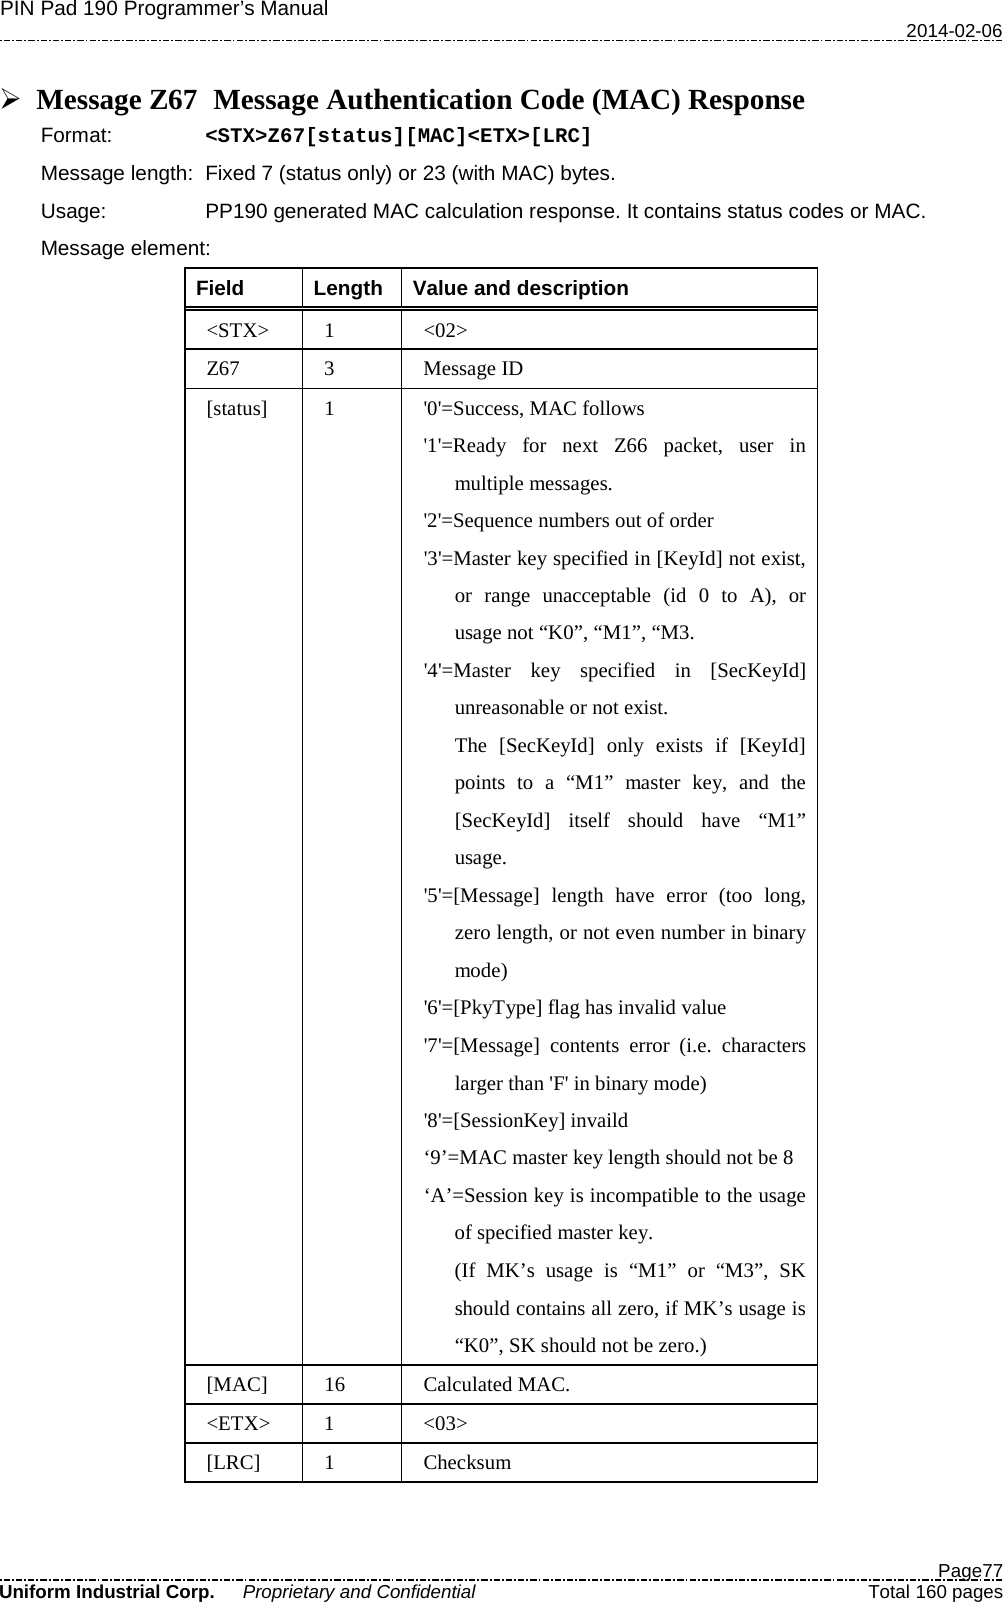 PIN Pad 190 Programmer’s Manual   2014-02-06  Page77 Uniform Industrial Corp. Proprietary and Confidential  Total 160 pages   Message Z67   Message Authentication Code (MAC) Response Format:   &lt;STX&gt;Z67[status][MAC]&lt;ETX&gt;[LRC] Message length: Fixed 7 (status only) or 23 (with MAC) bytes. Usage: PP190 generated MAC calculation response. It contains status codes or MAC. Message element:   Field  Length  Value and description &lt;STX&gt;  1  &lt;02&gt; Z67  3  Message ID [status]  1  &apos;0&apos;=Success, MAC follows &apos;1&apos;=Ready for next Z66 packet, user in multiple messages. &apos;2&apos;=Sequence numbers out of order &apos;3&apos;=Master key specified in [KeyId] not exist, or range unacceptable (id 0 to A), or usage not “K0”, “M1”, “M3. &apos;4&apos;=Master key specified in [SecKeyId] unreasonable or not exist.   The [SecKeyId] only exists if [KeyId] points to a “M1” master key, and the [SecKeyId] itself should have “M1” usage. &apos;5&apos;=[Message] length have error (too long, zero length, or not even number in binary mode) &apos;6&apos;=[PkyType] flag has invalid value &apos;7&apos;=[Message] contents error (i.e. characters larger than &apos;F&apos; in binary mode) &apos;8&apos;=[SessionKey] invaild ‘9’=MAC master key length should not be 8 ‘A’=Session key is incompatible to the usage of specified master key. (If MK’s usage is “M1”  or  “M3”, SK should contains all zero, if MK’s usage is “K0”, SK should not be zero.) [MAC] 16 Calculated MAC. &lt;ETX&gt;  1  &lt;03&gt; [LRC]  1  Checksum  